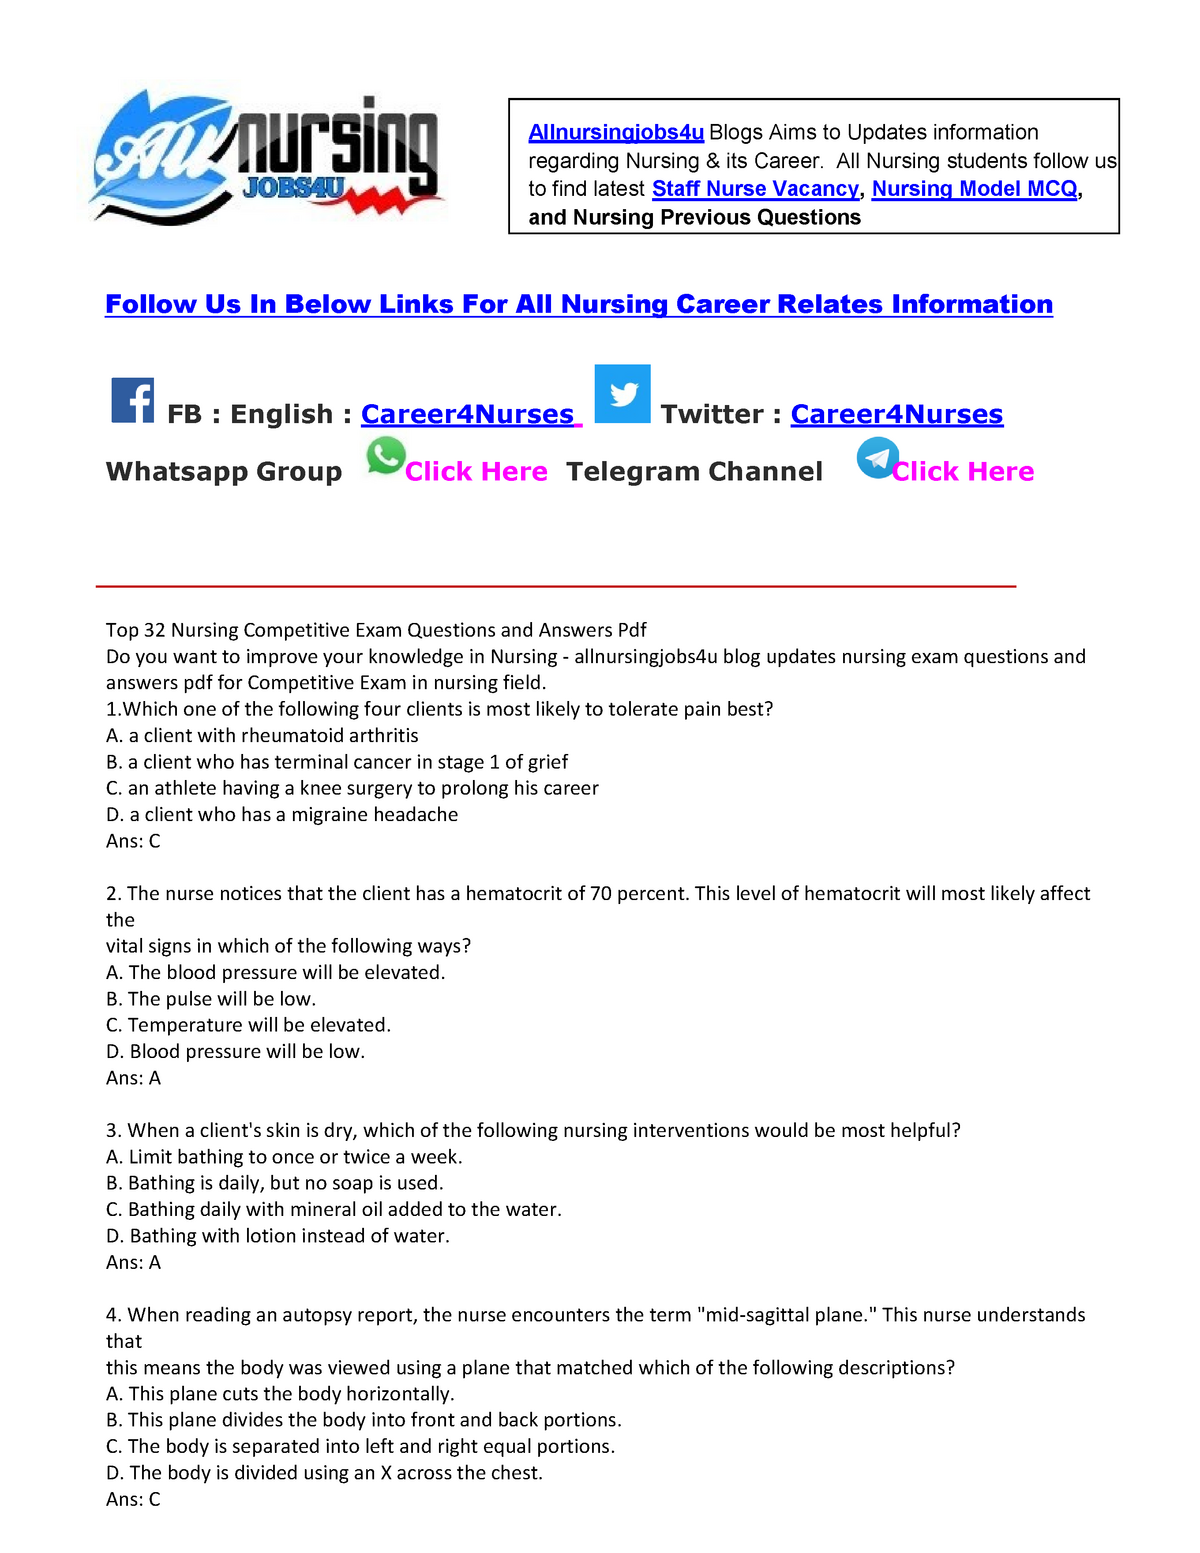 fundamentals-of-nursing-questions-and-answers-pdf-download